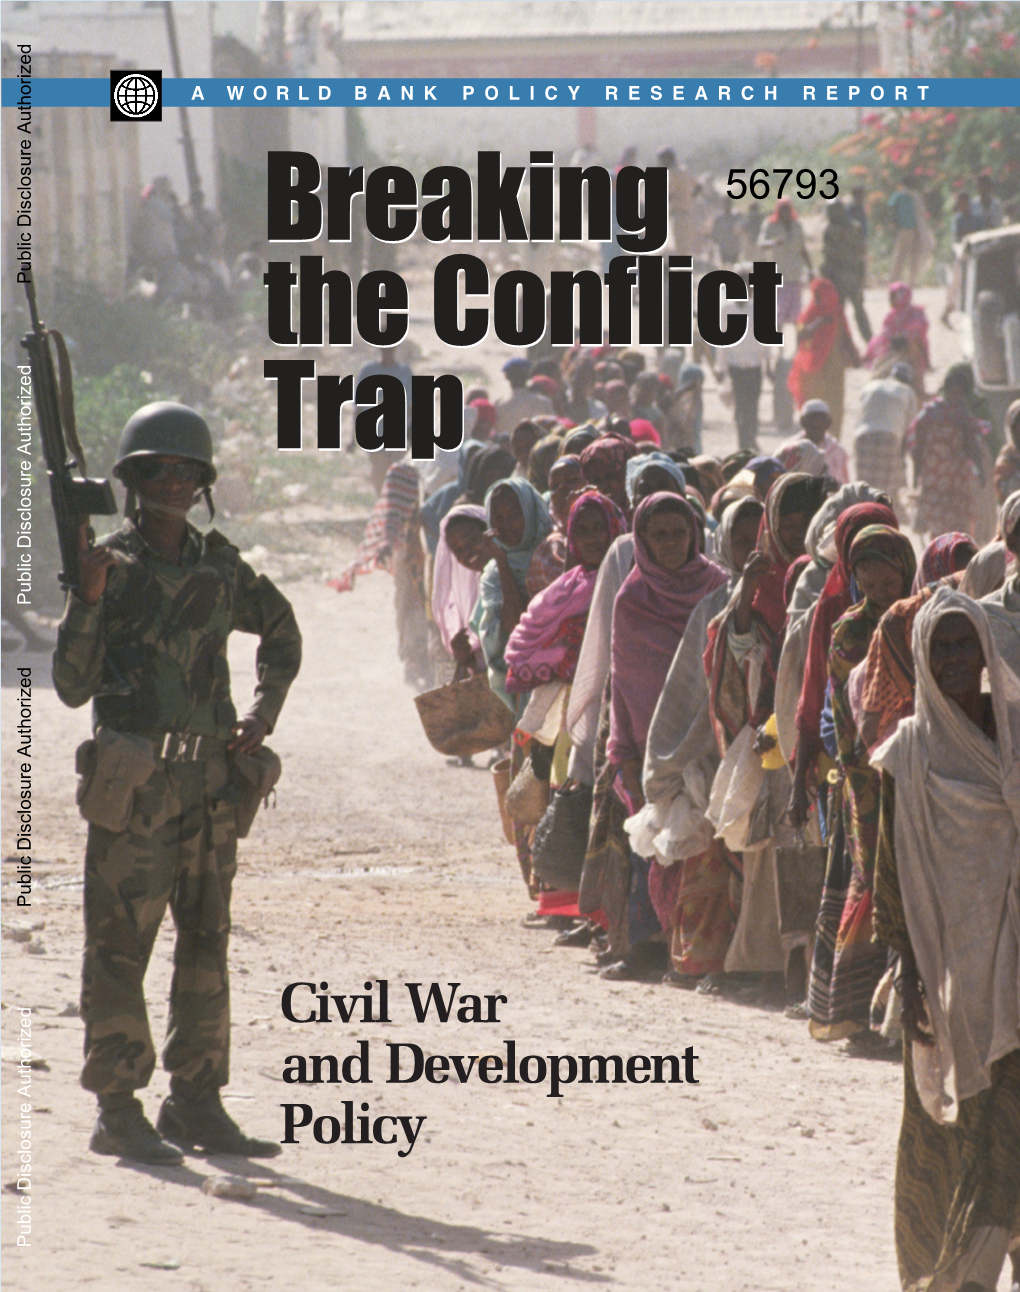 Breaking the Conflict Trap Civil War and Development Policy